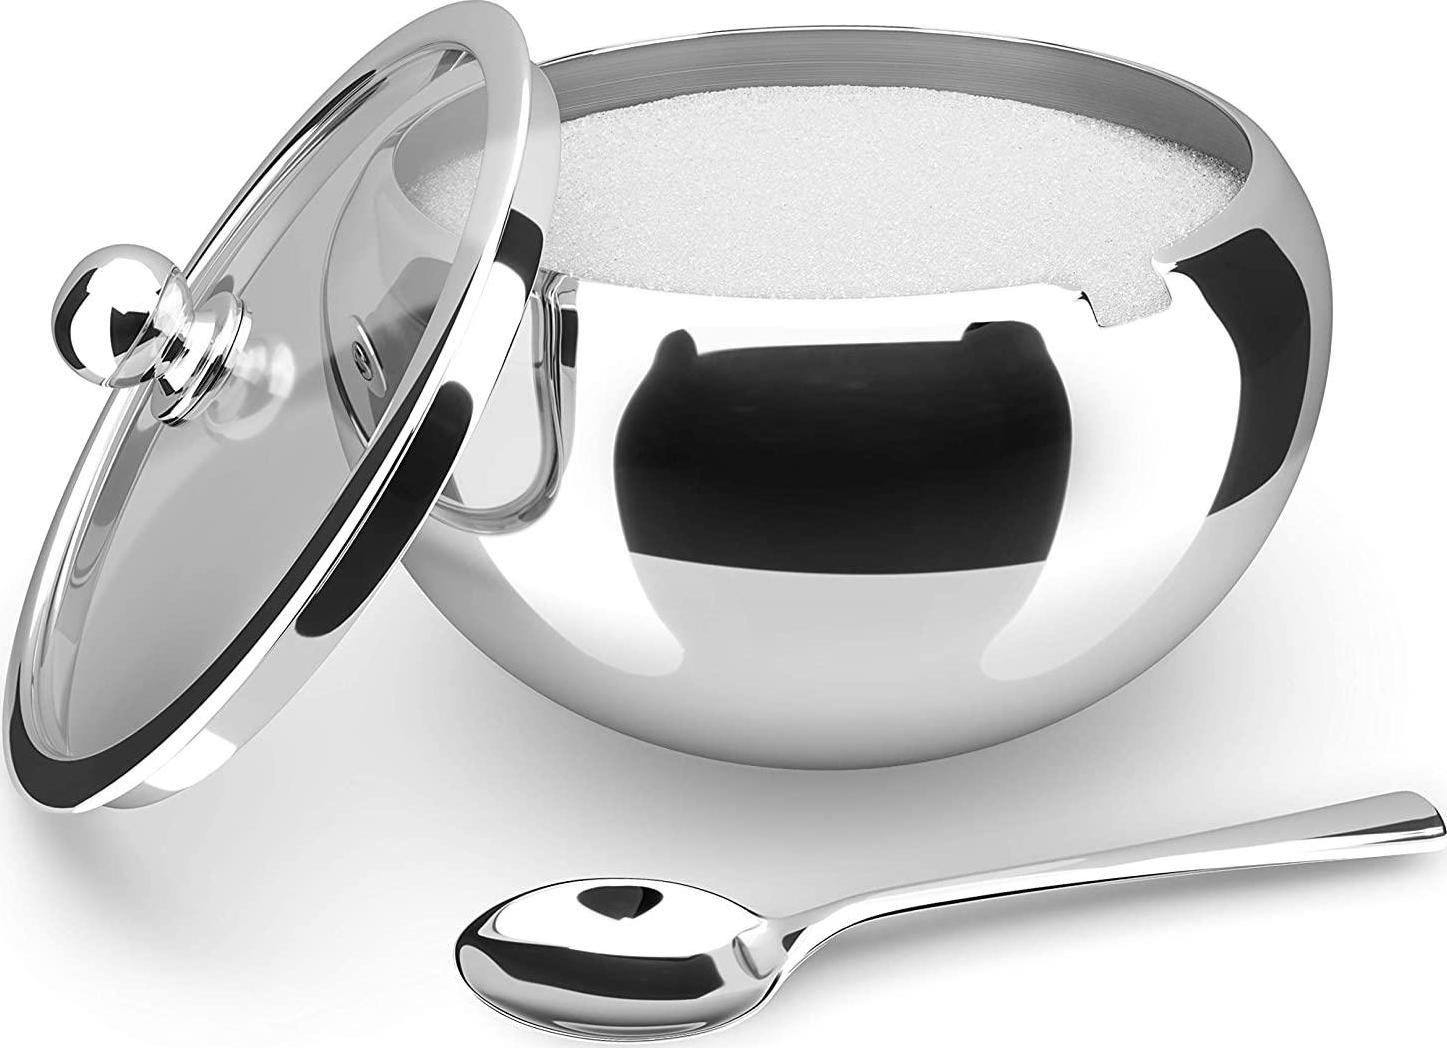 KooK, KooK Large Sugar Bowl, Stainless Steel With Glass Lid, Includes Stainless Steel Spoon, Holds 2 cups of Sugar, 480gm